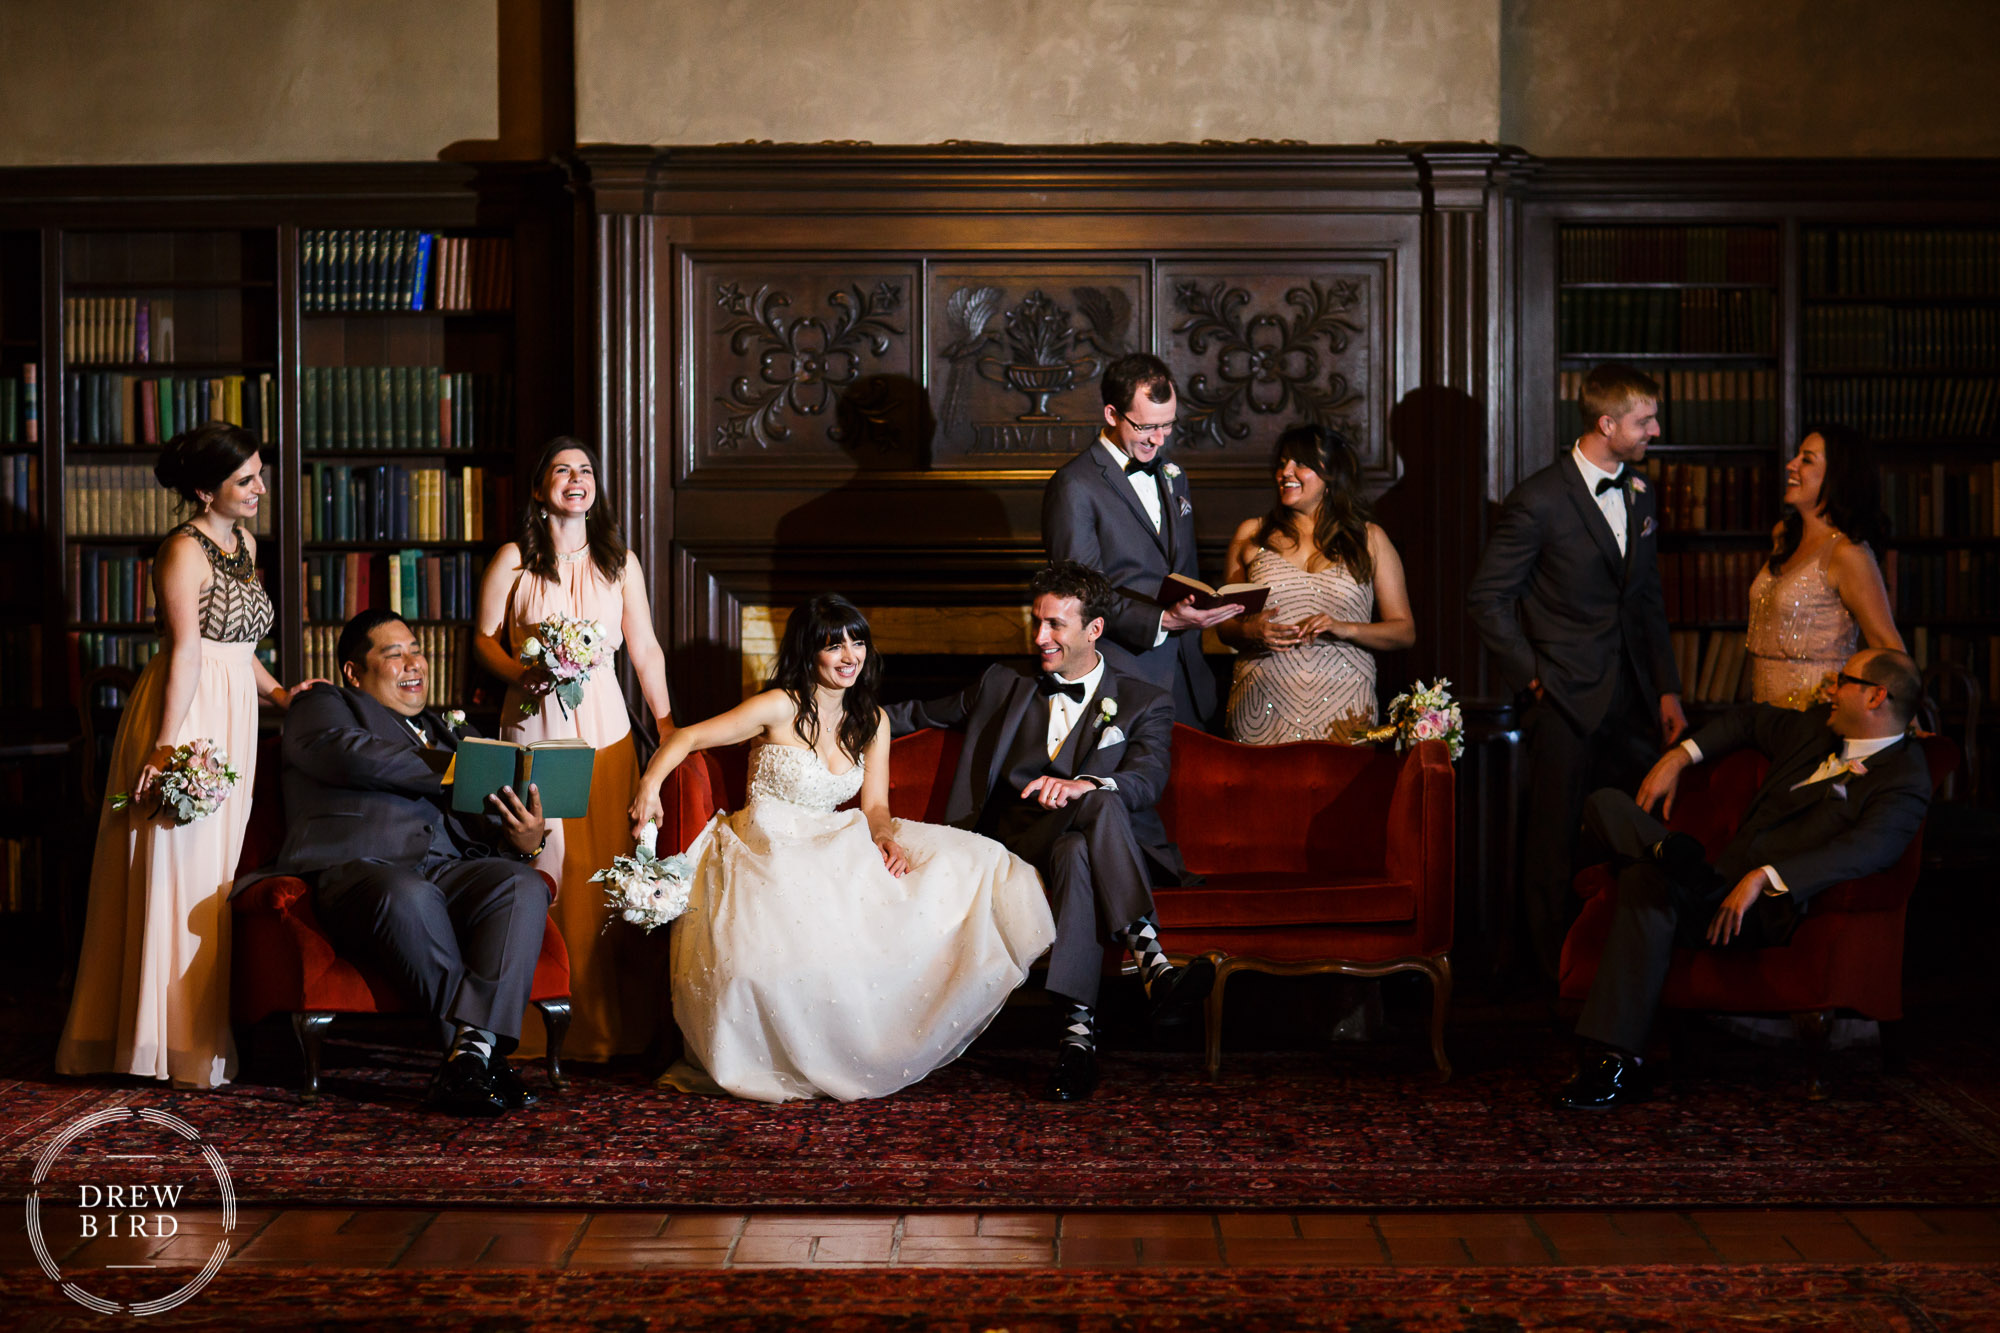 Unique wedding party portrait in library room at the Berkeley City Club. Persian wedding photography by Oakland photographer Drew Bird.